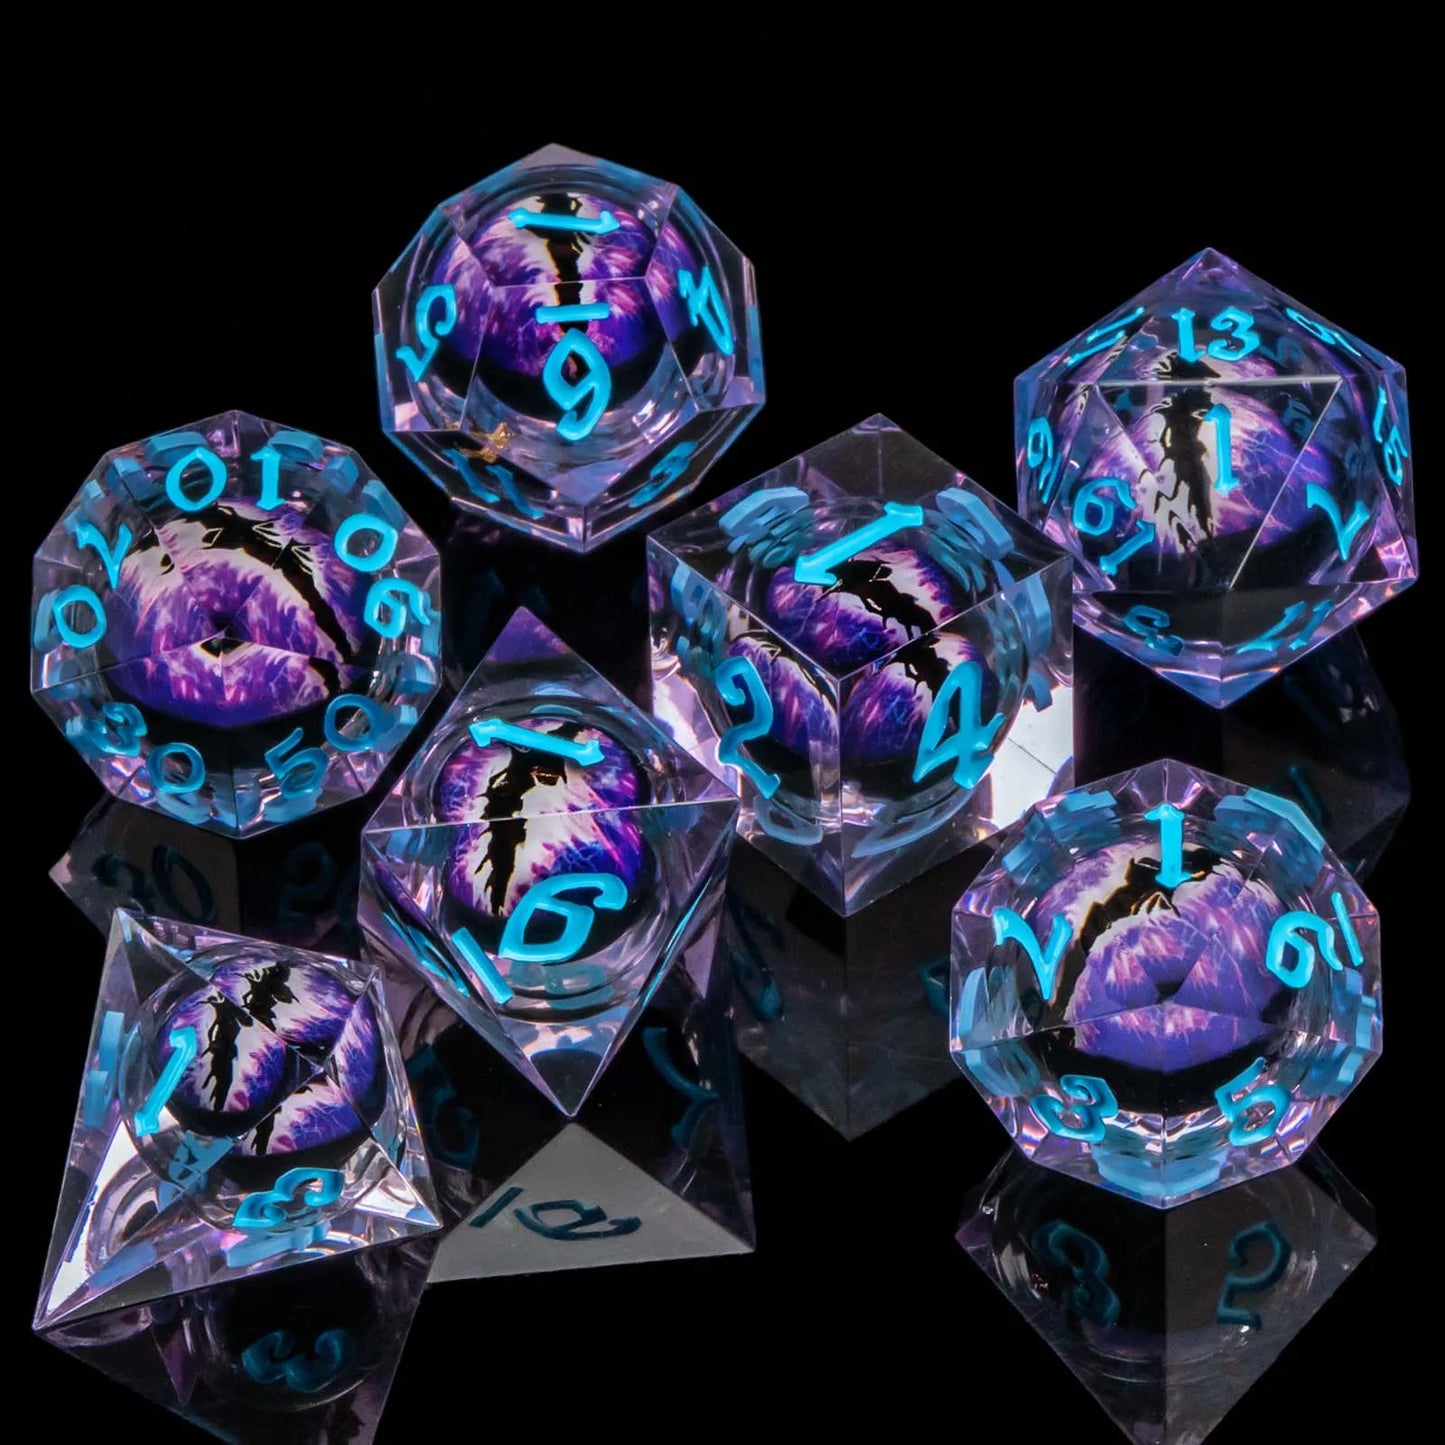 DND Eye Liquid Flow Core Resin D&D Dice Set For D and D Dungeon and Dragon Pathfinder Table Role Playing Game Polyhedral Dice AZ10